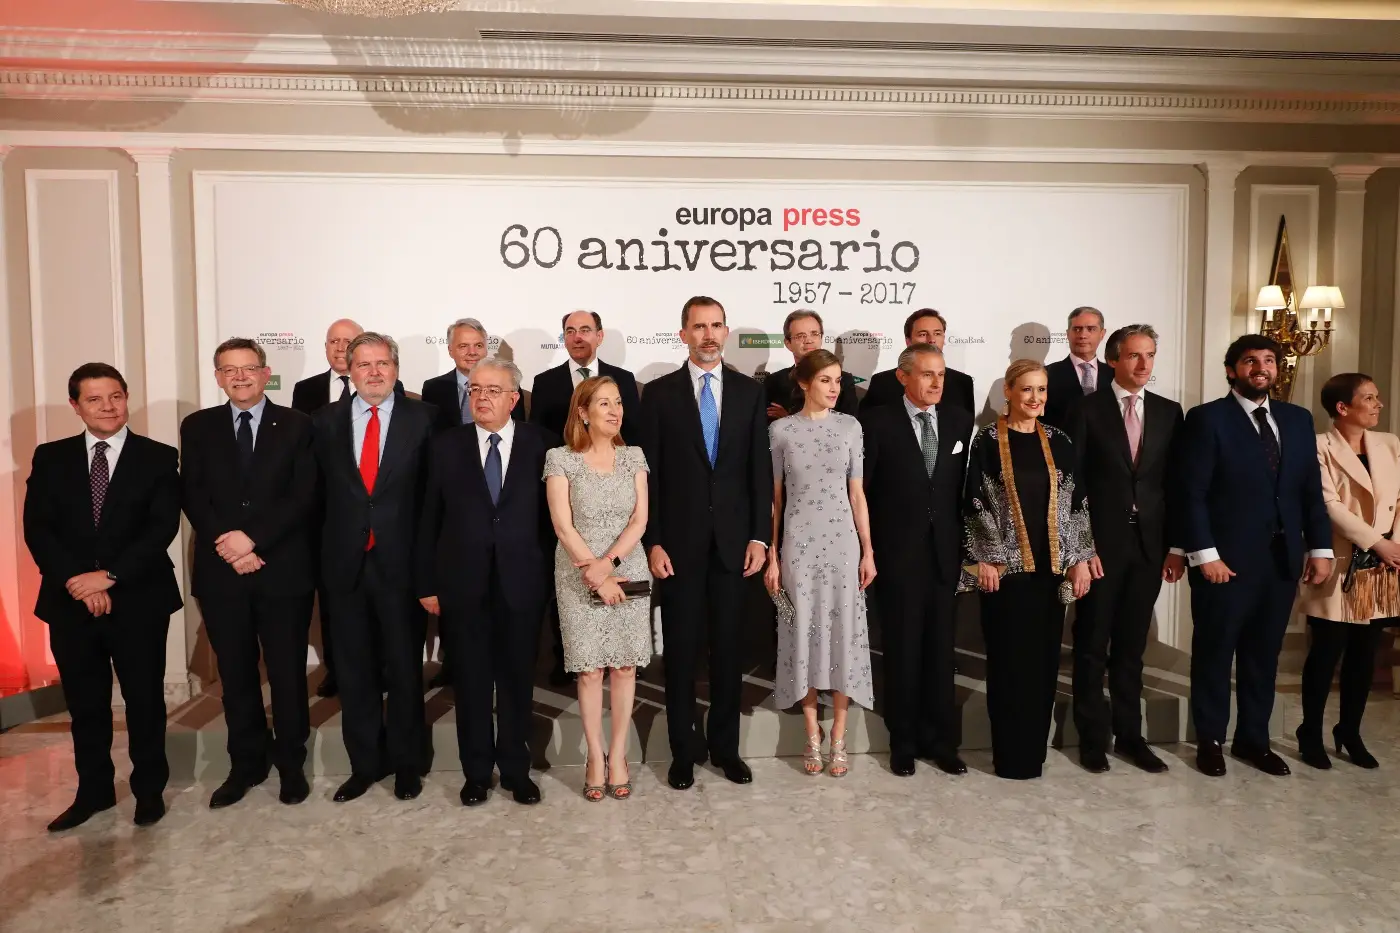 Glamorous Queen of Spain attended Press Agency celebrations in Madrid